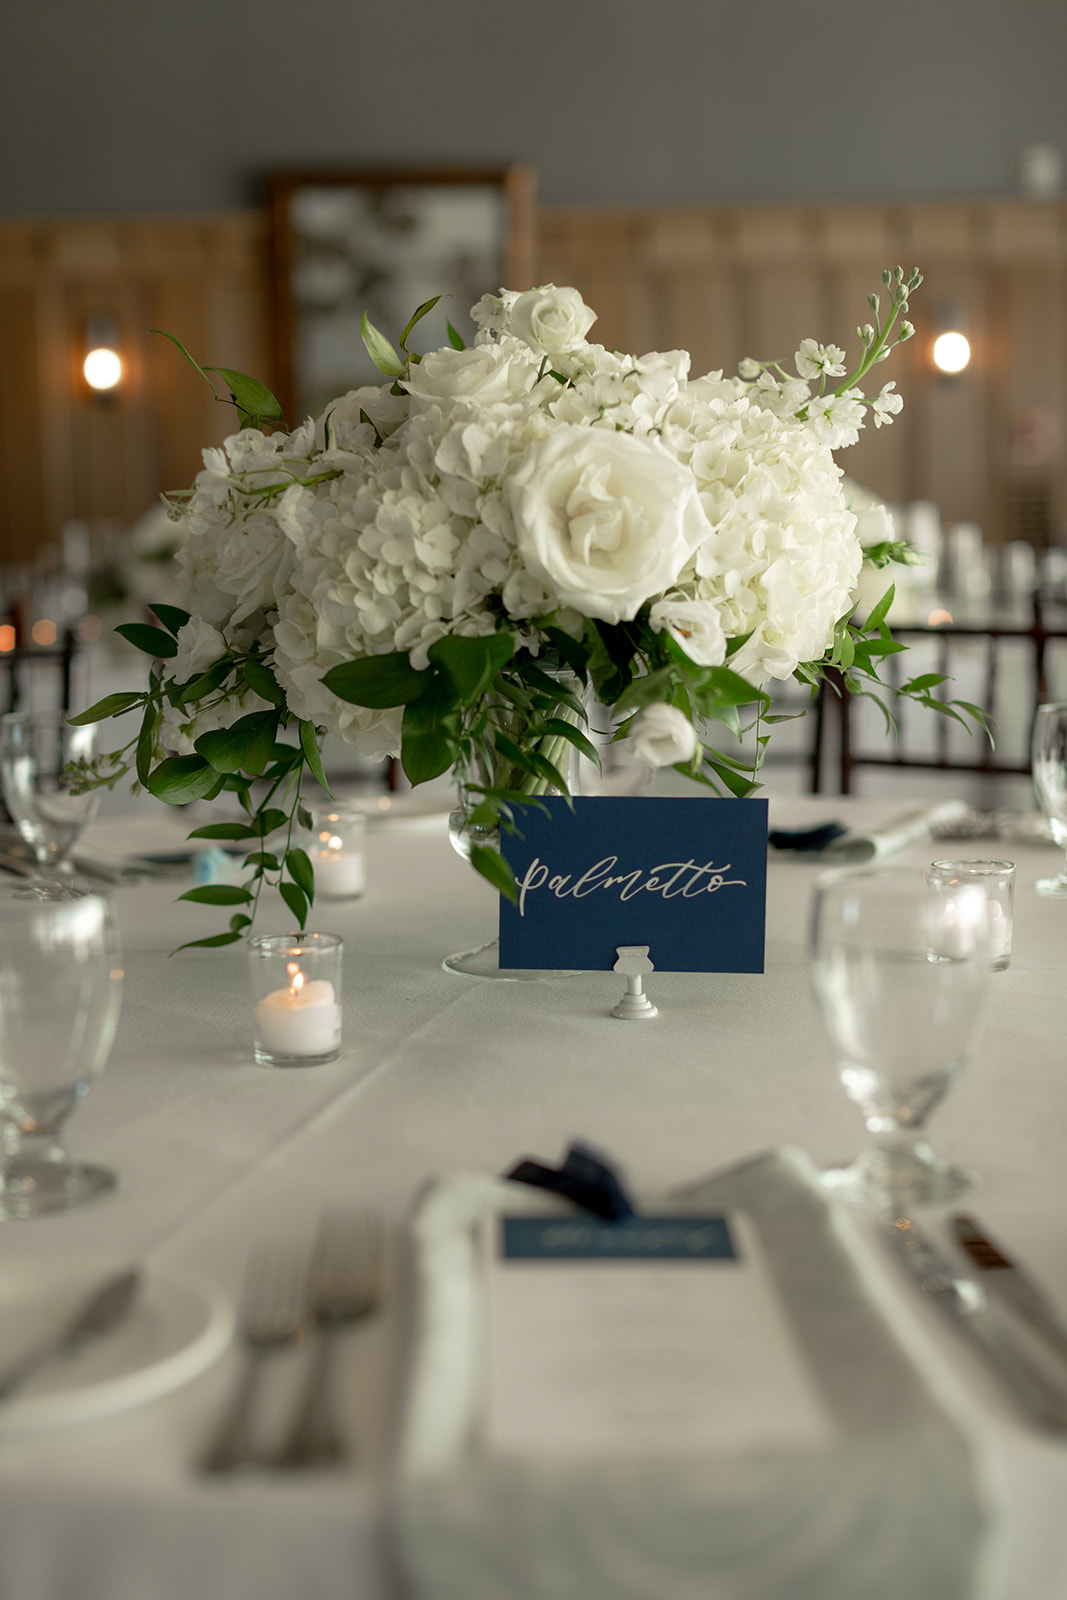 Wedding recetion table setup with flowers, tabel card and silverware at Kiawah Ocean Course wedding